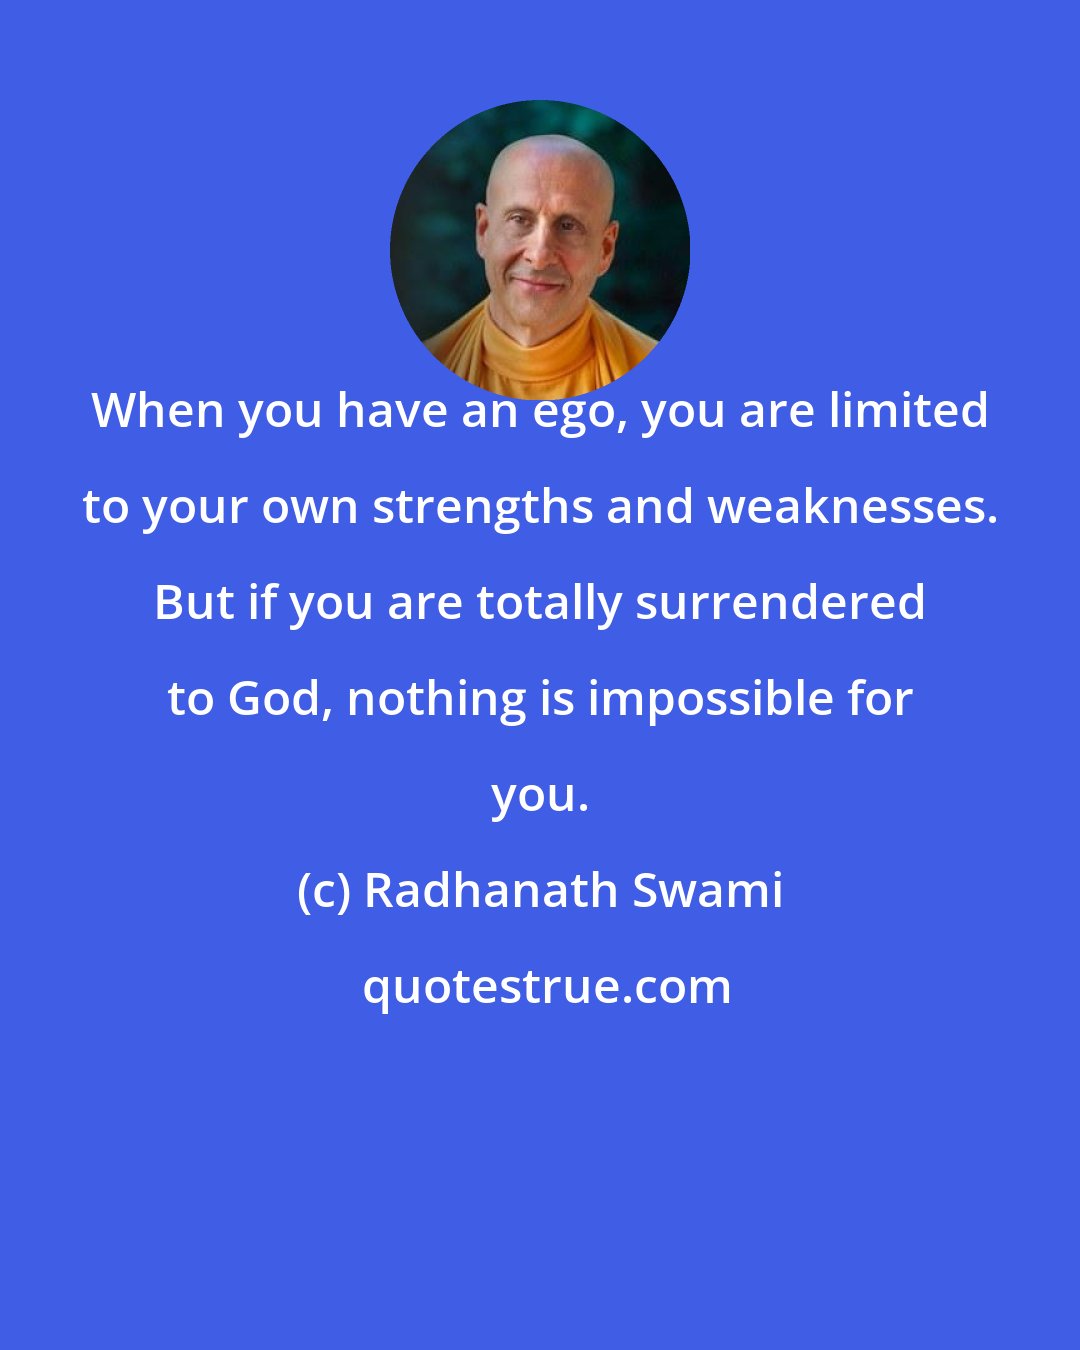 Radhanath Swami: When you have an ego, you are limited to your own strengths and weaknesses. But if you are totally surrendered to God, nothing is impossible for you.